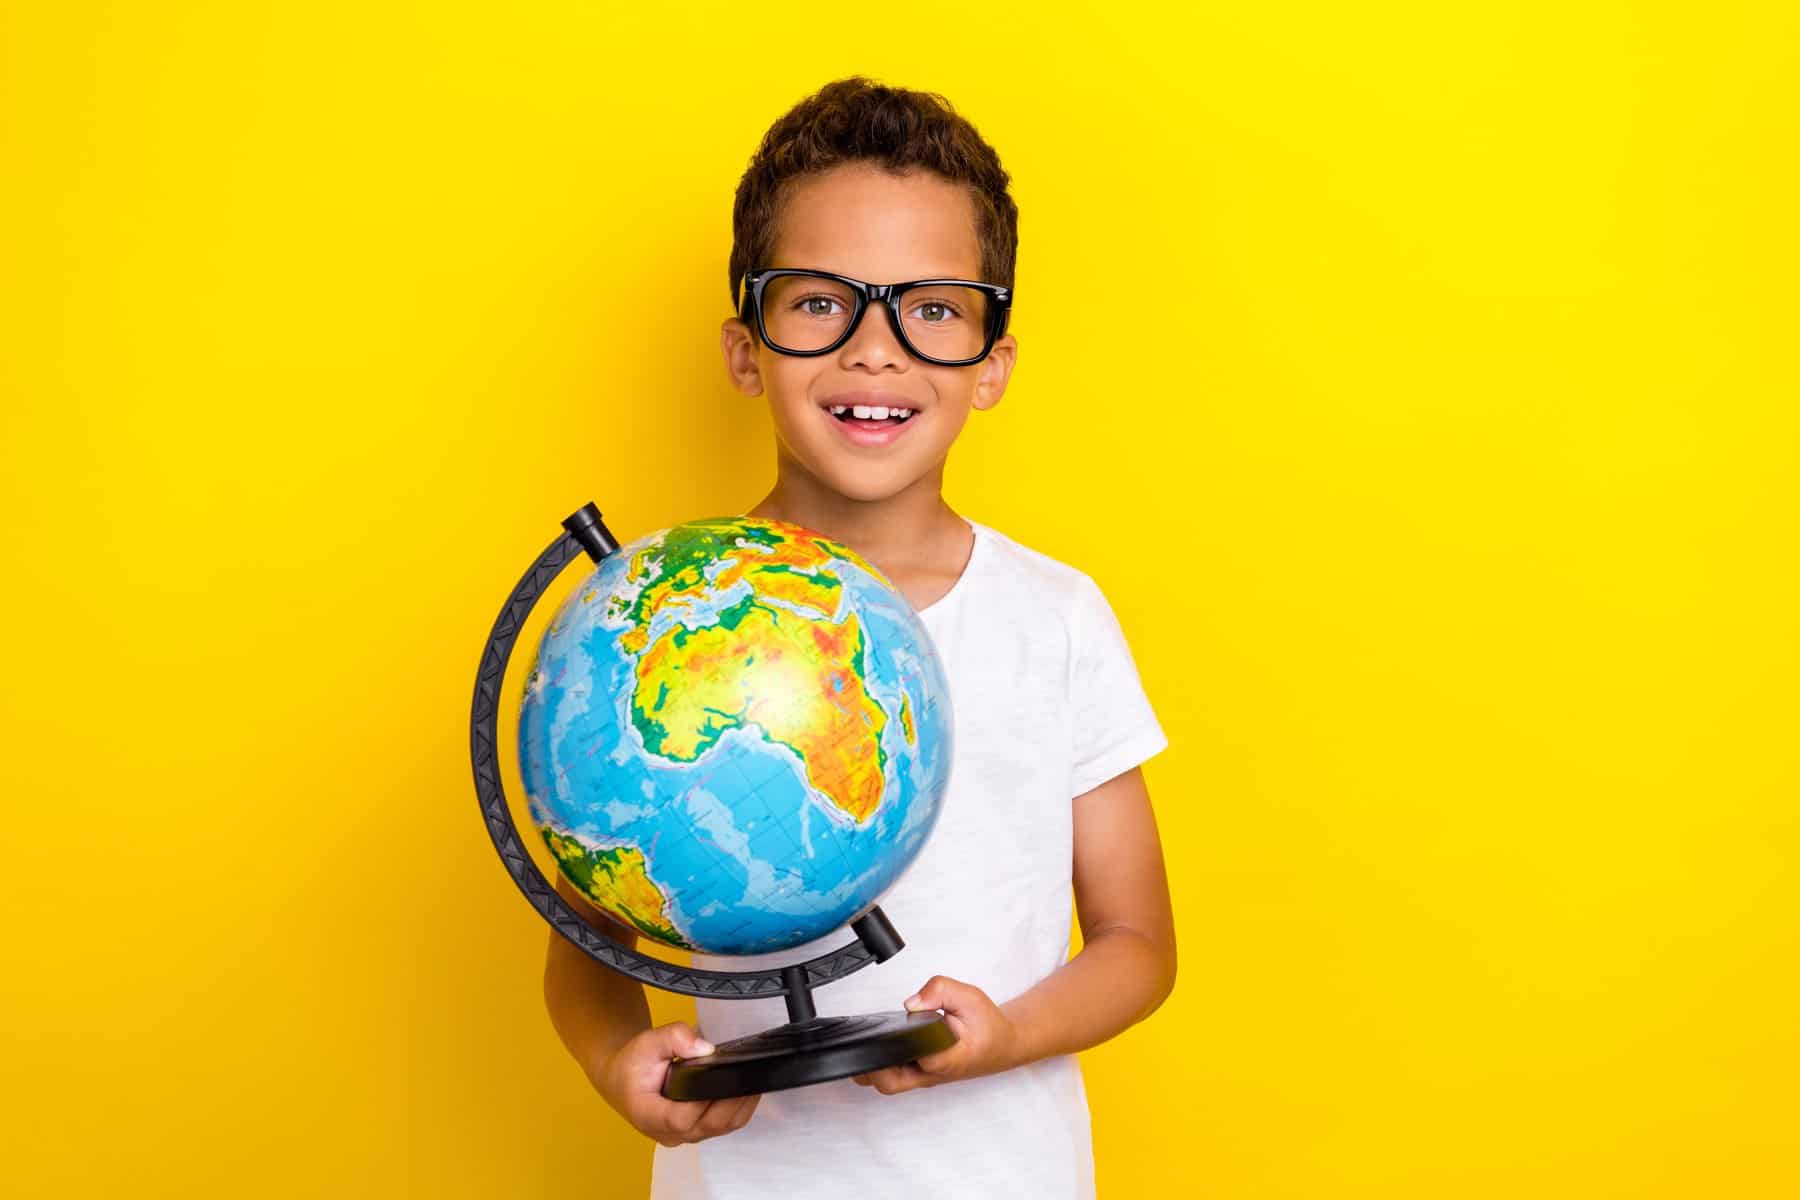 Young boy with glasses holding a globe